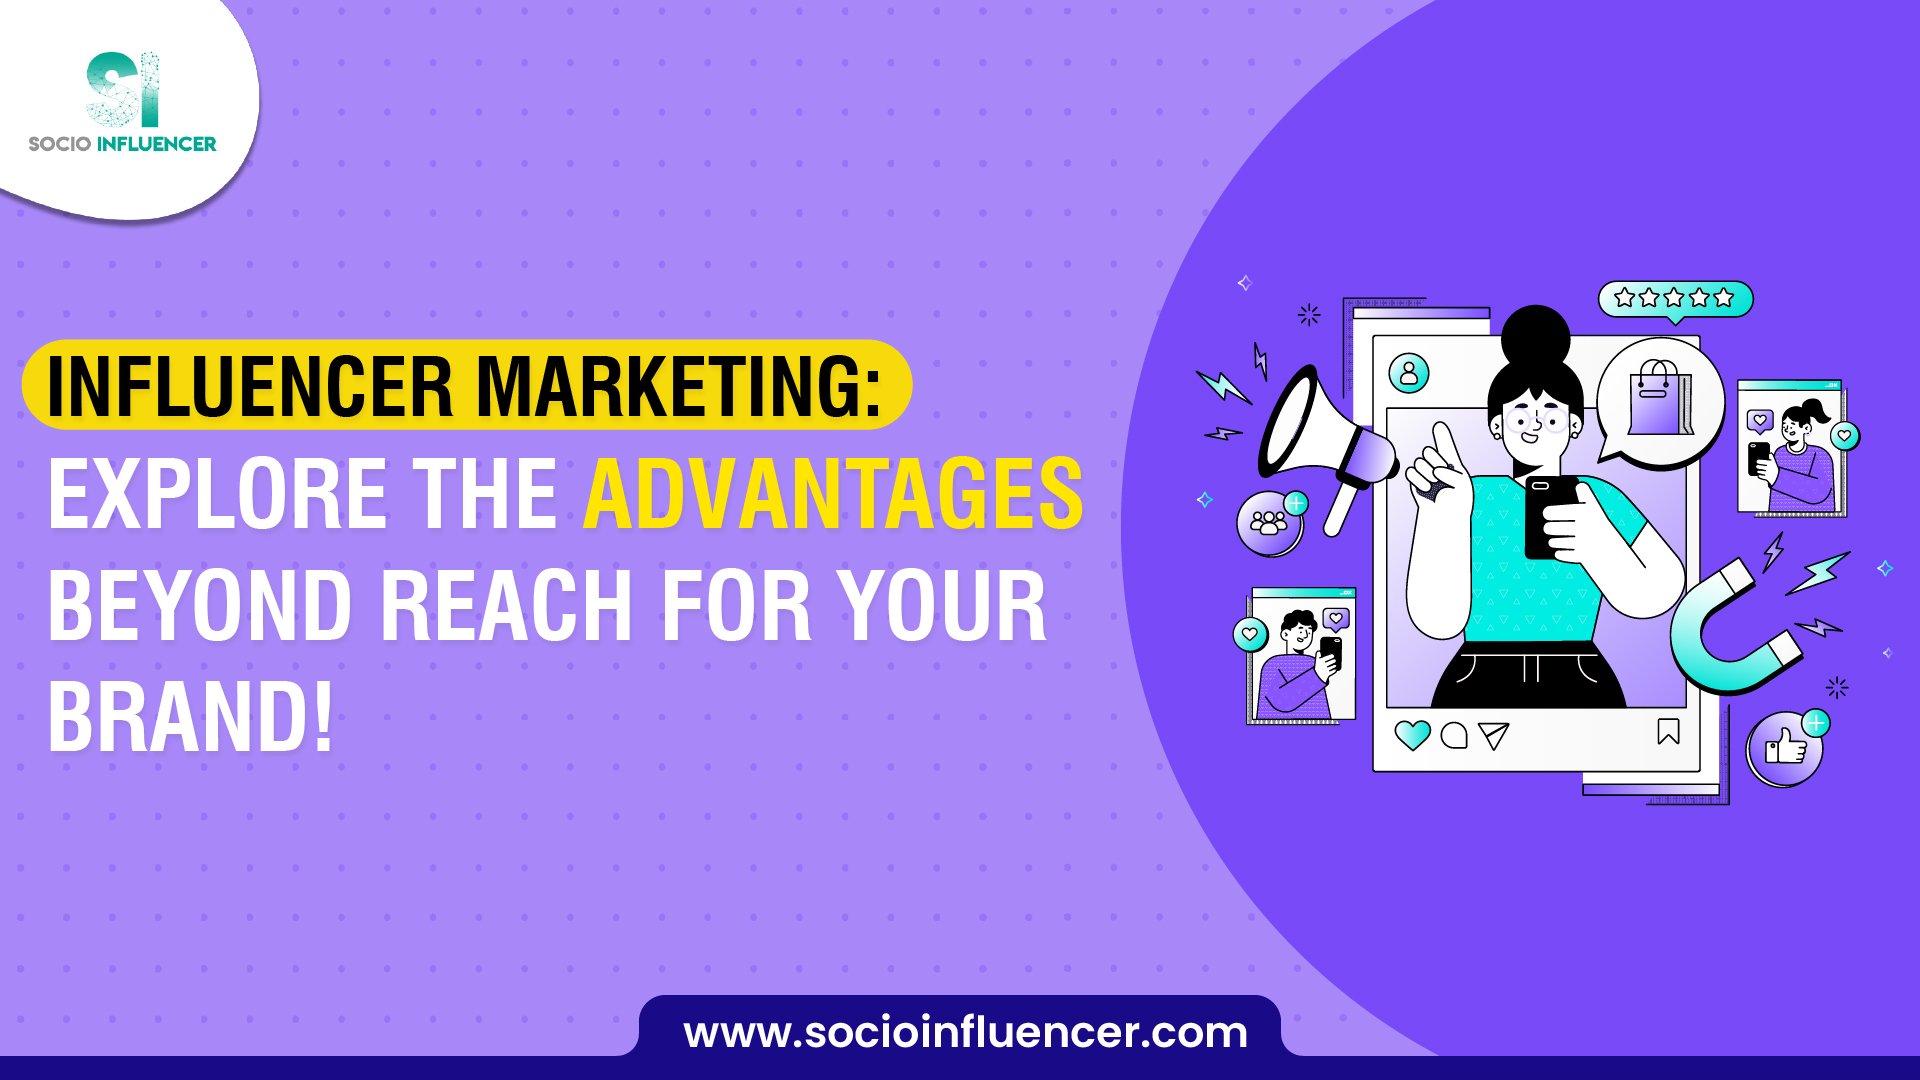 What are the Benefits of Influencer Marketing for your Business?